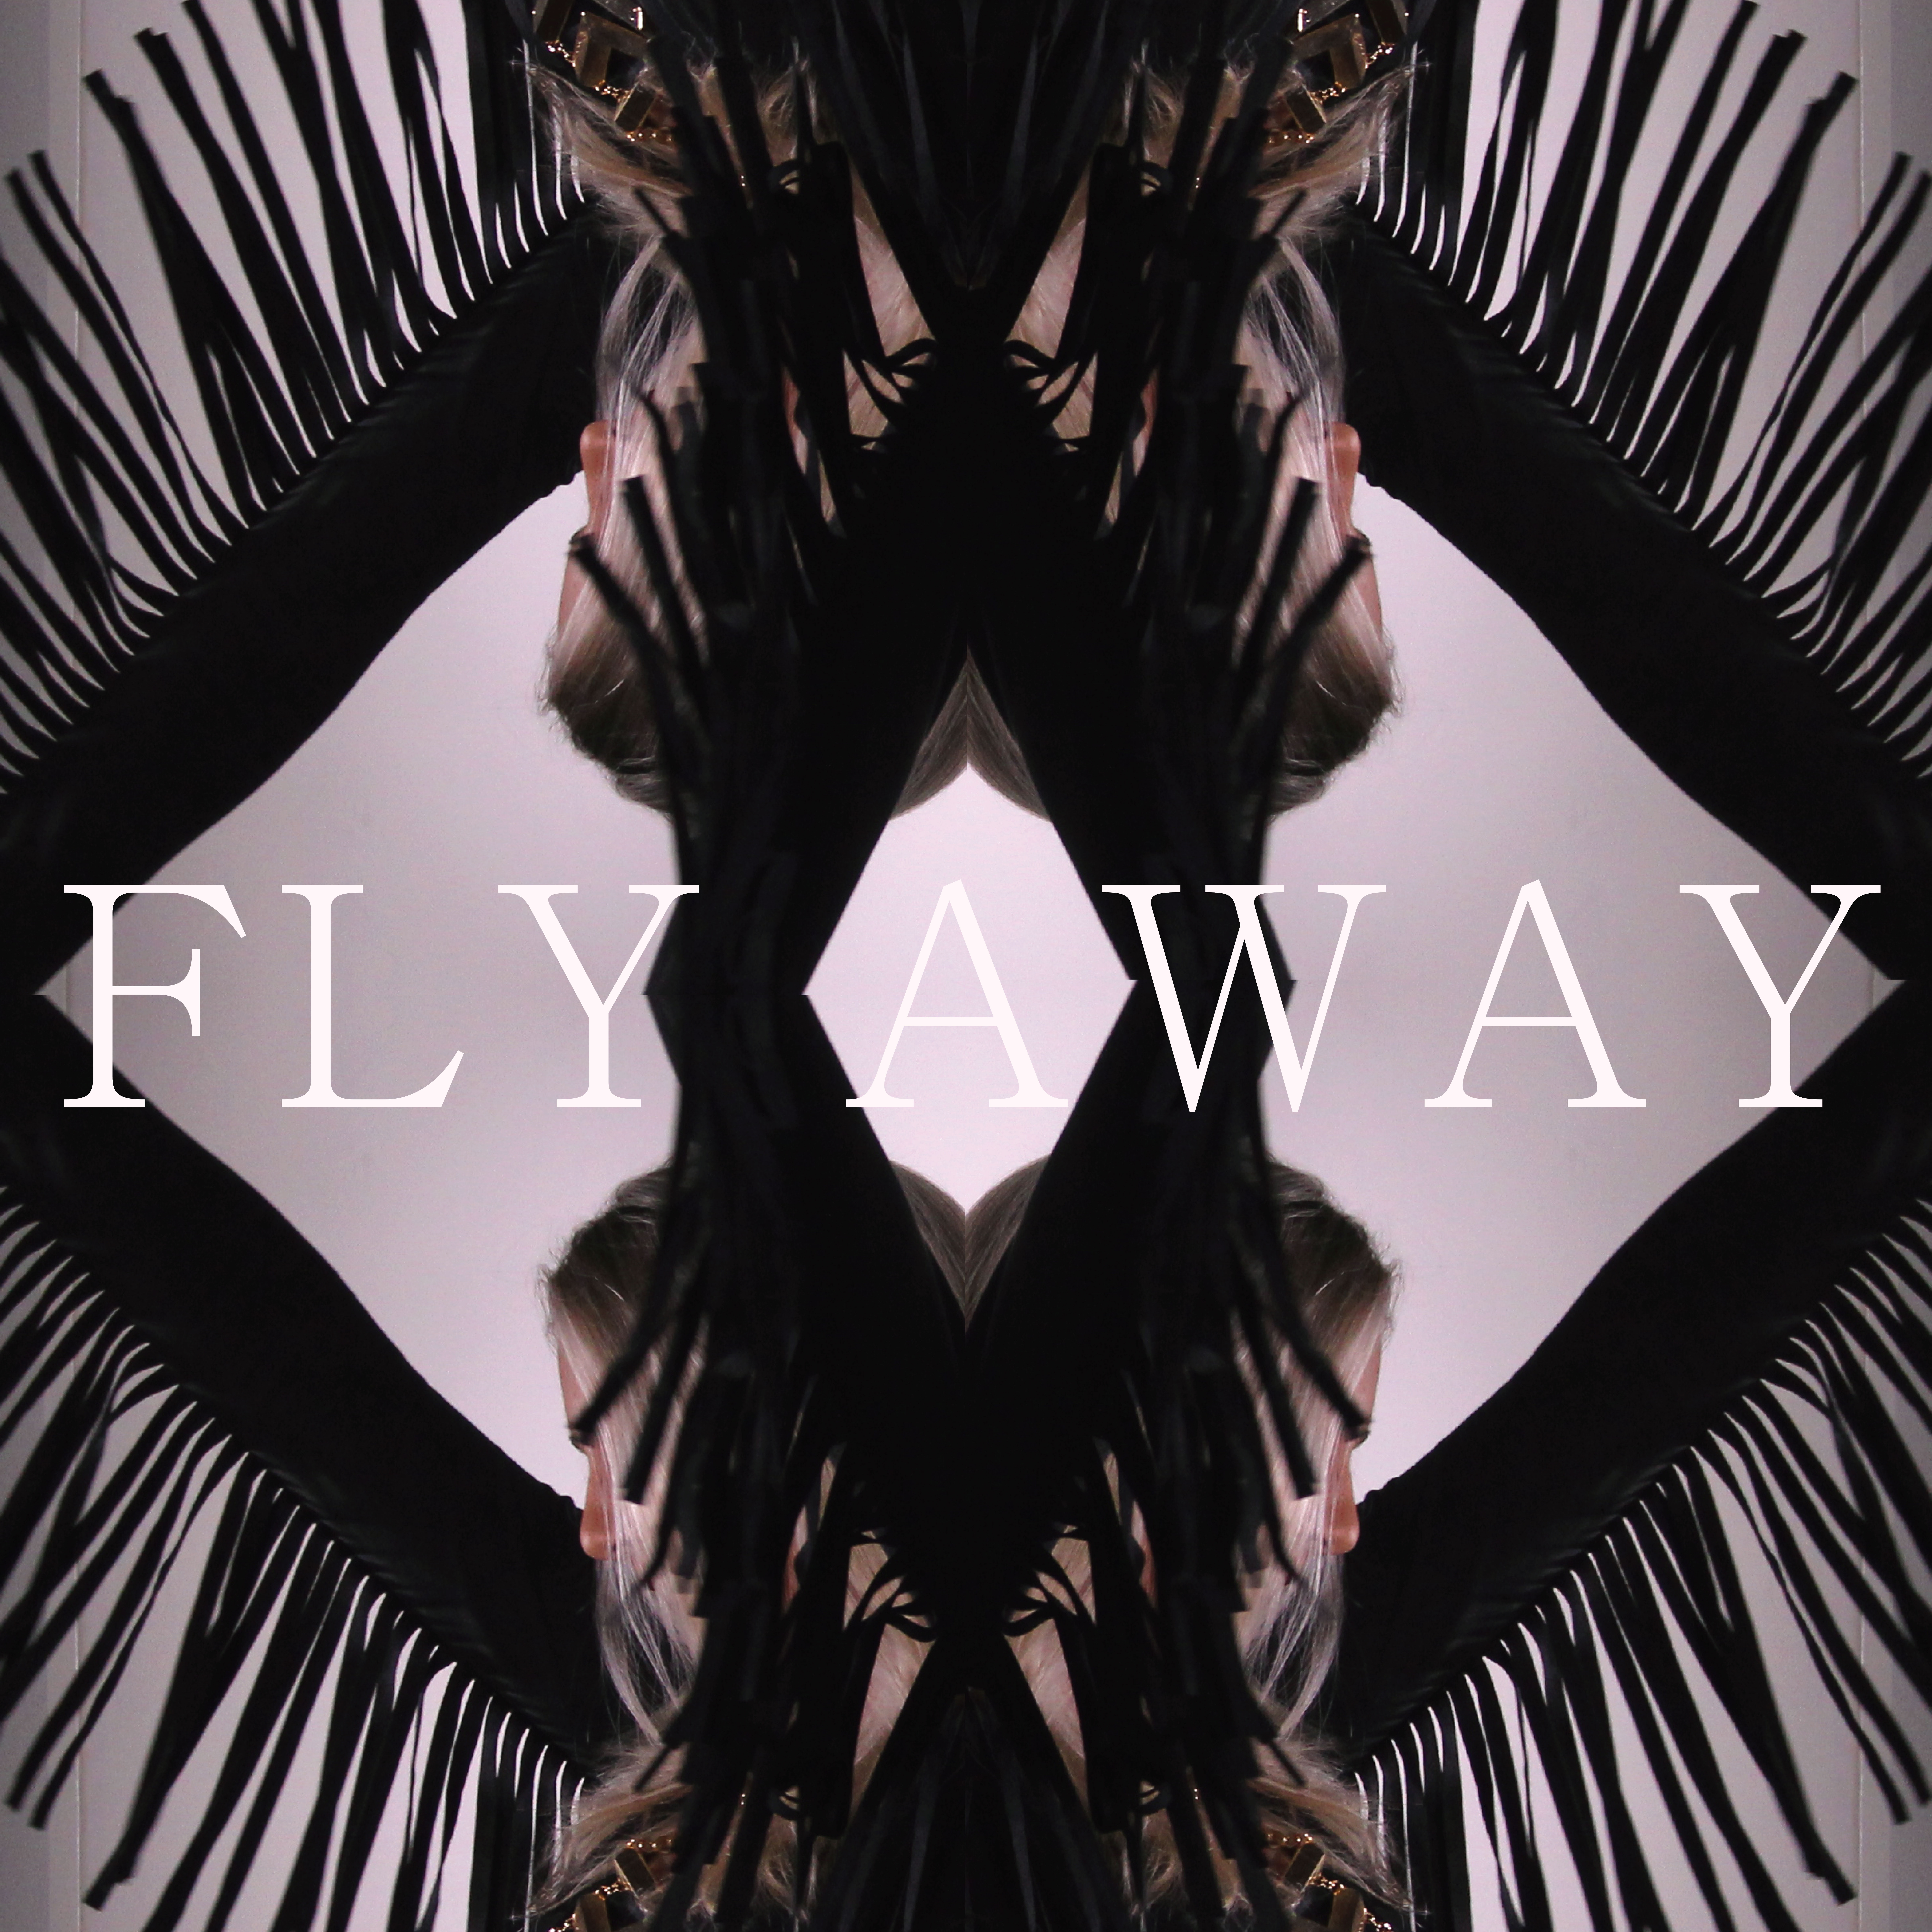 Artwork for track: Fly Away by Kirsty Abrahams